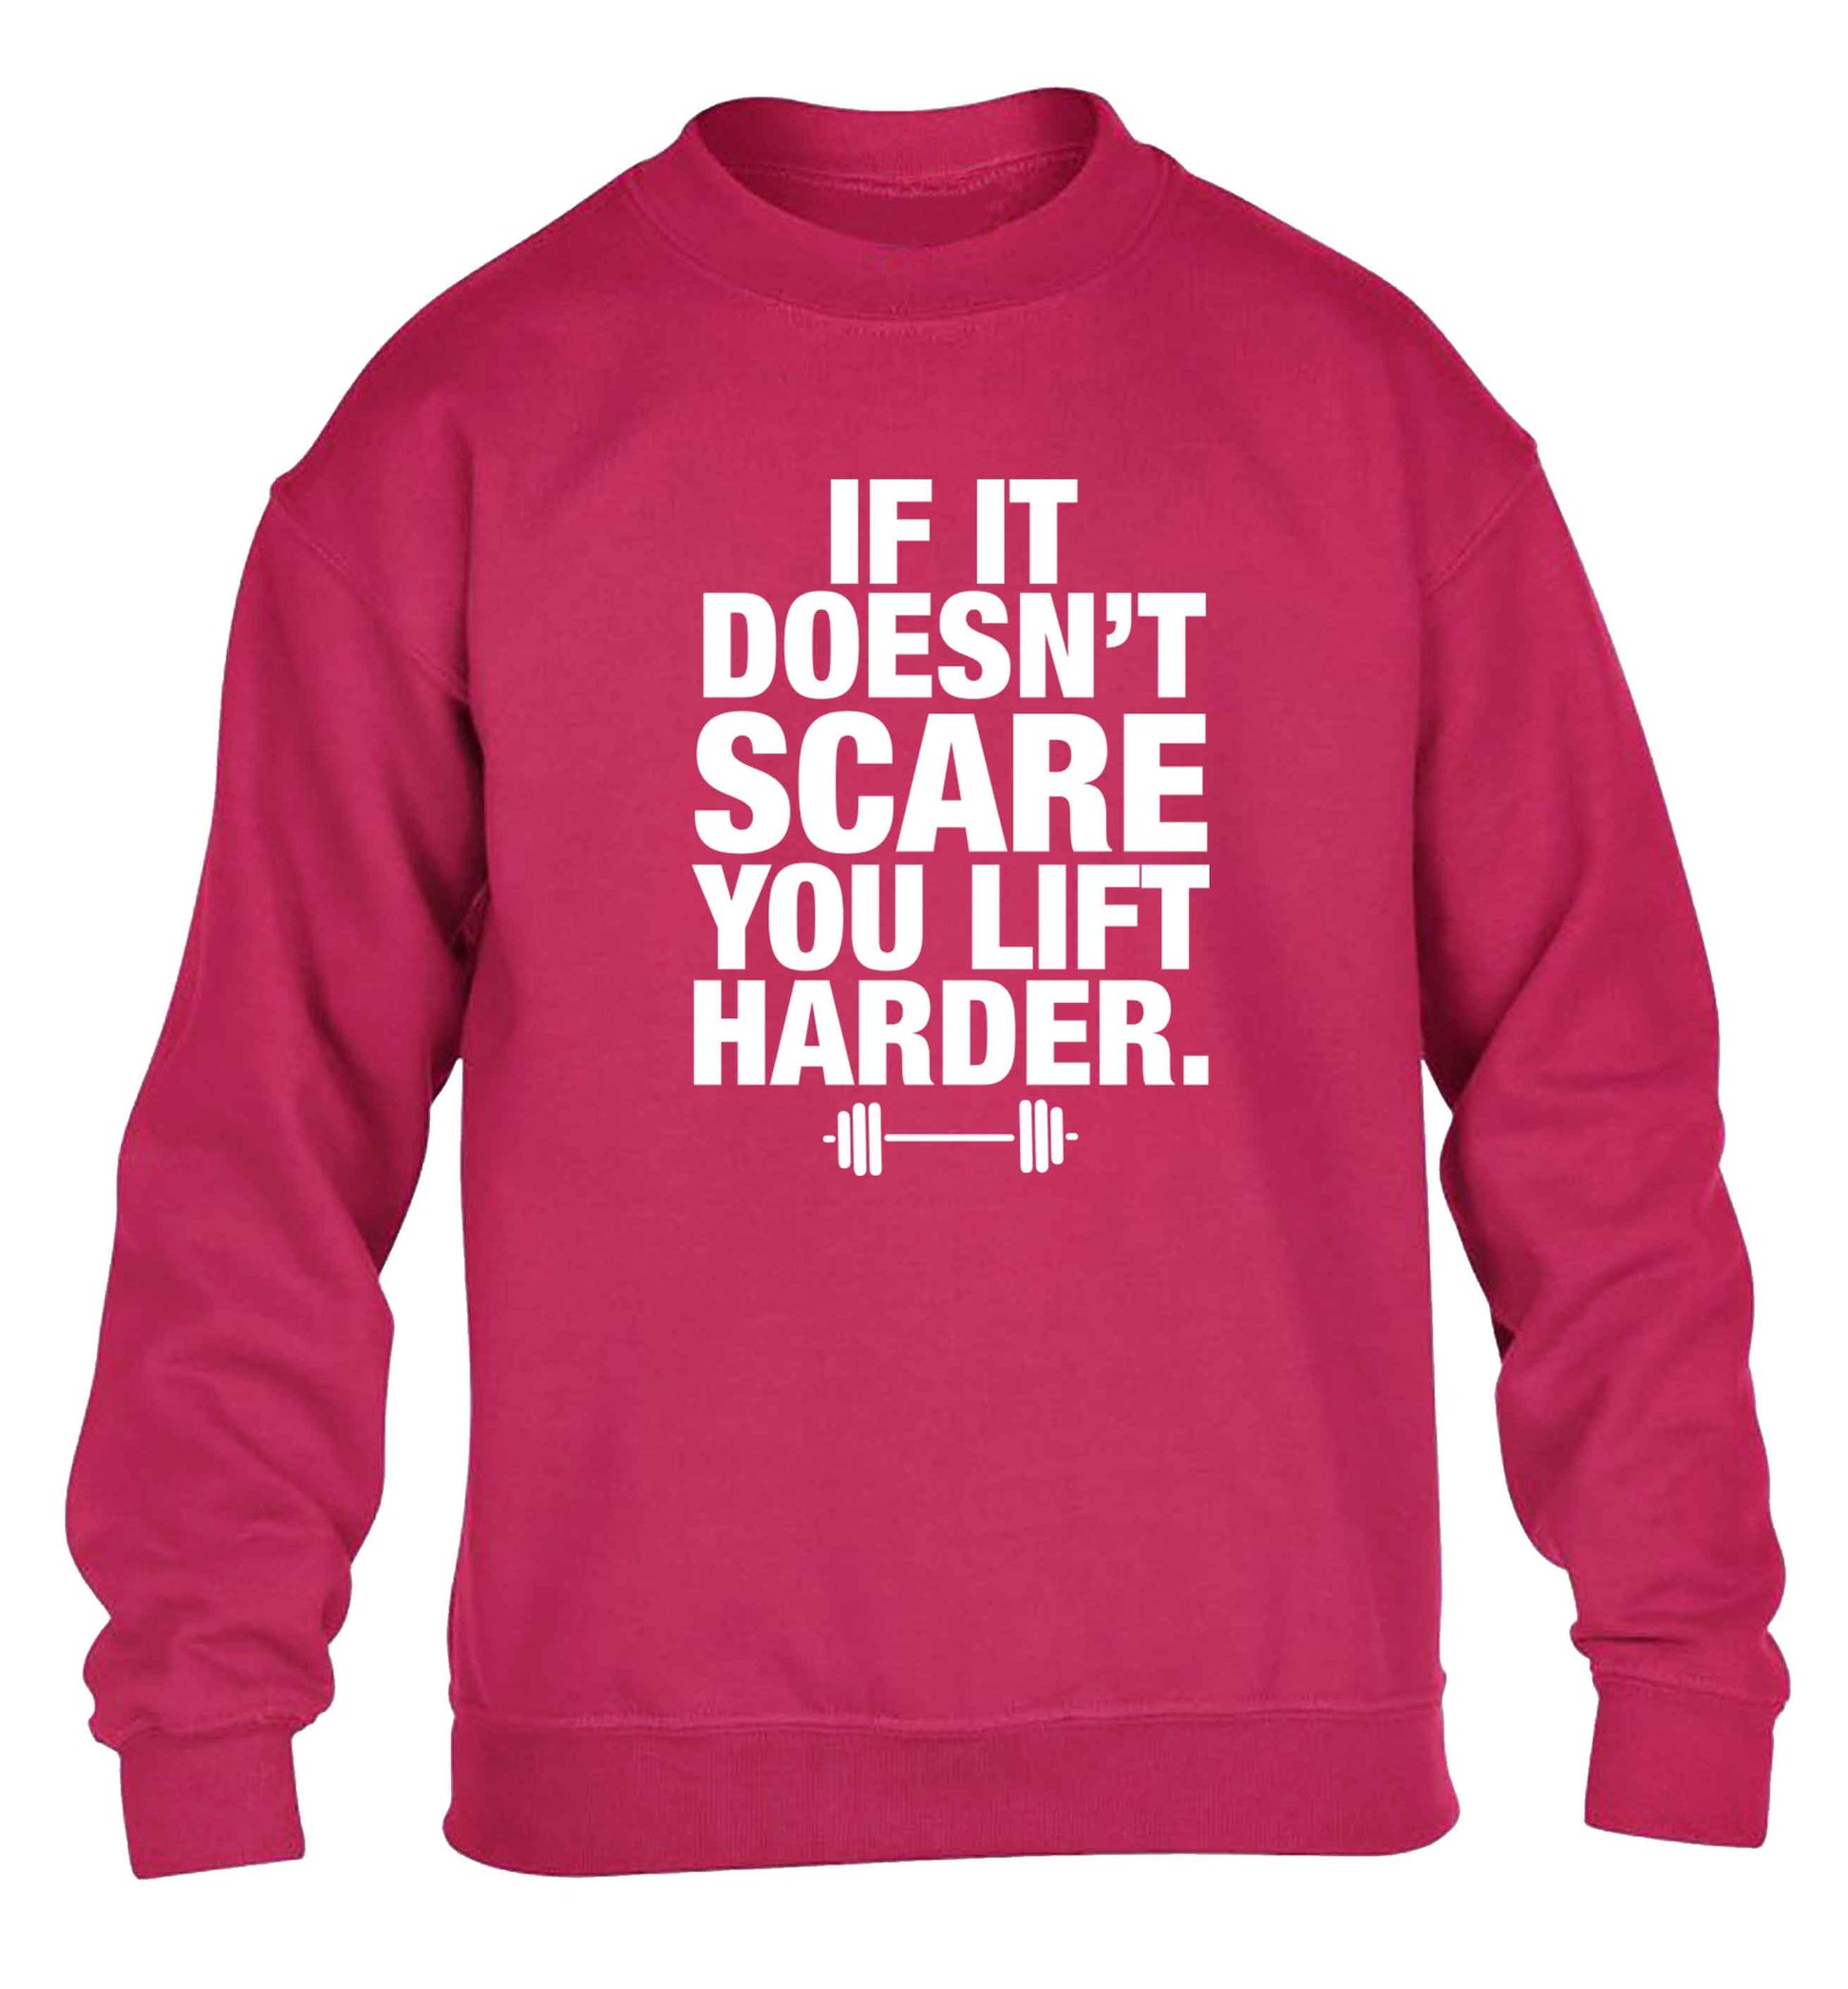 If it doesnt' scare you lift harder children's pink sweater 12-13 Years